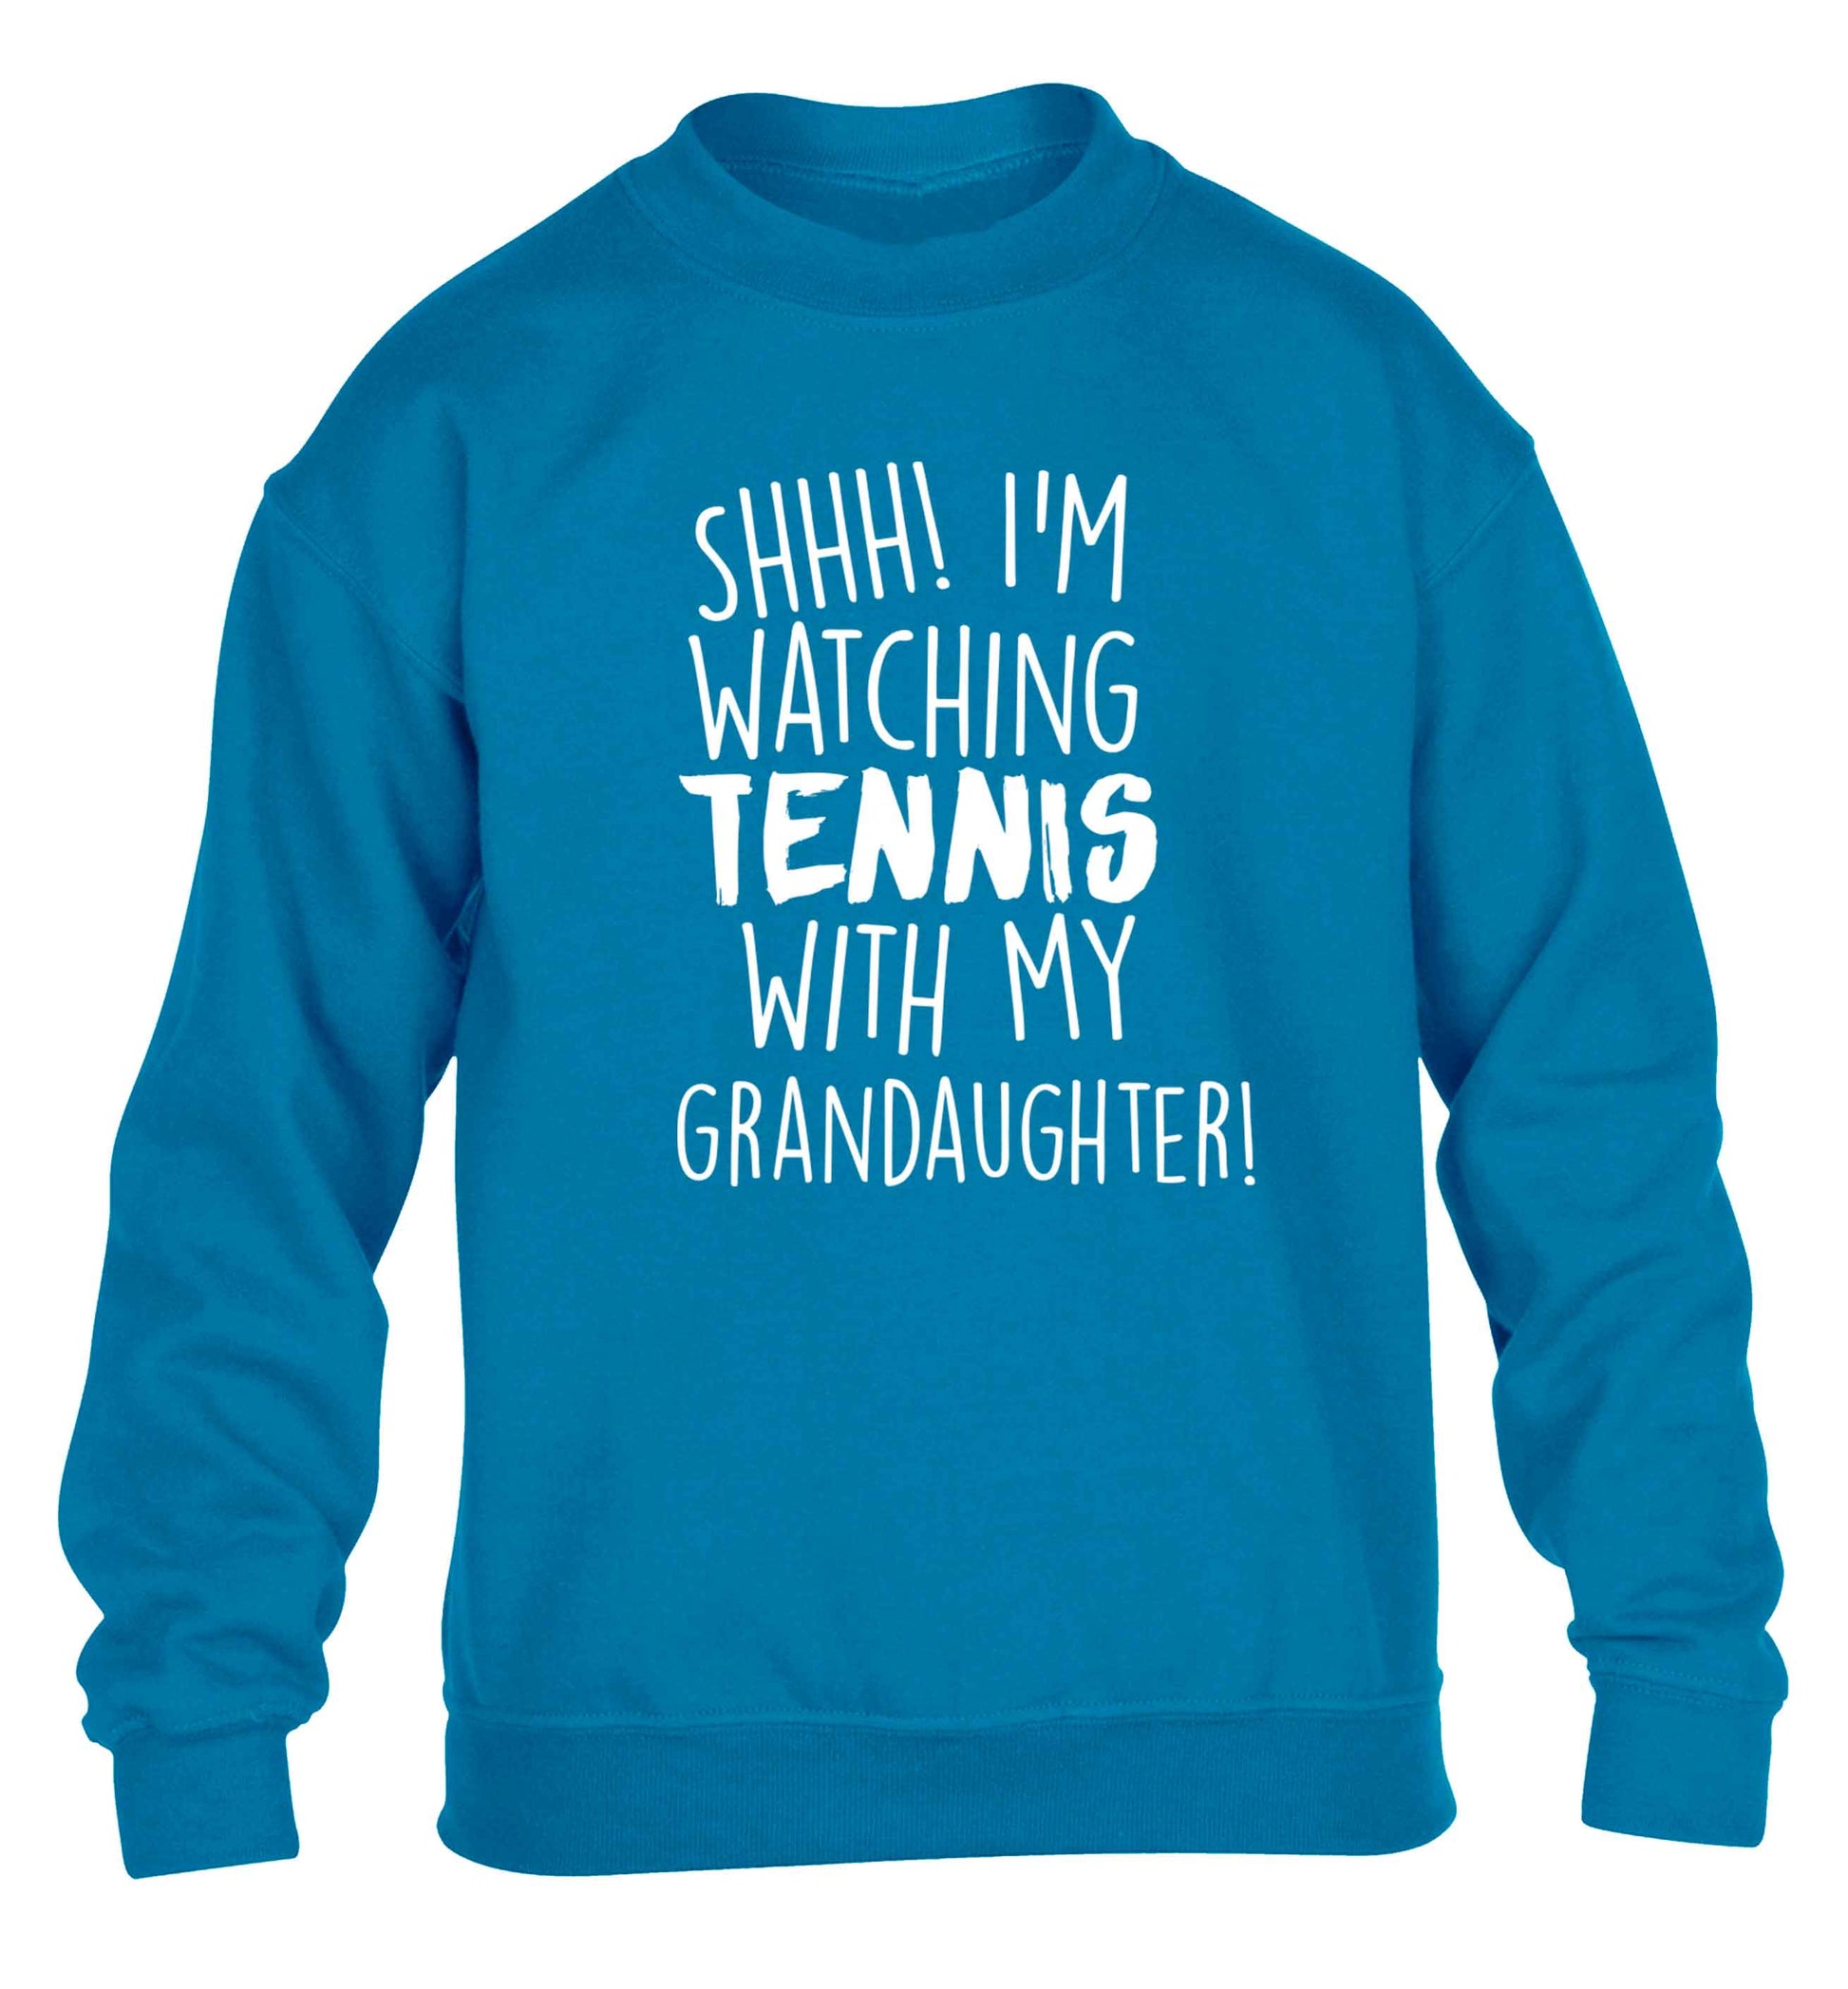 Shh! I'm watching tennis with my granddaughter! children's blue sweater 12-13 Years